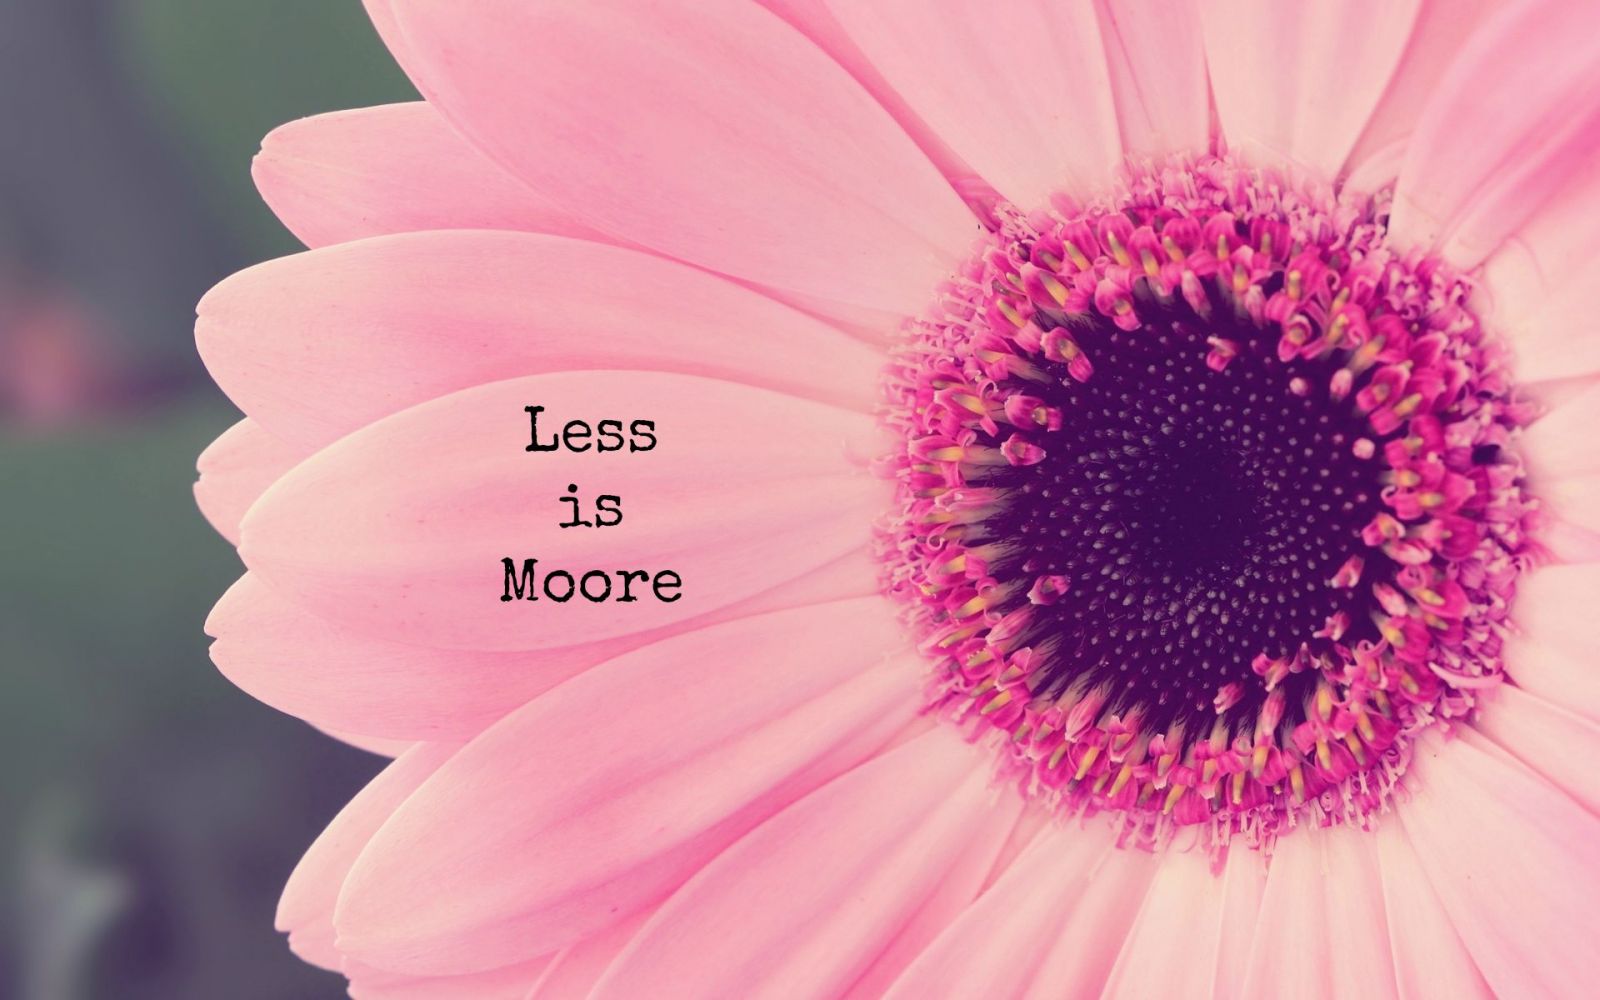 Less is Moore